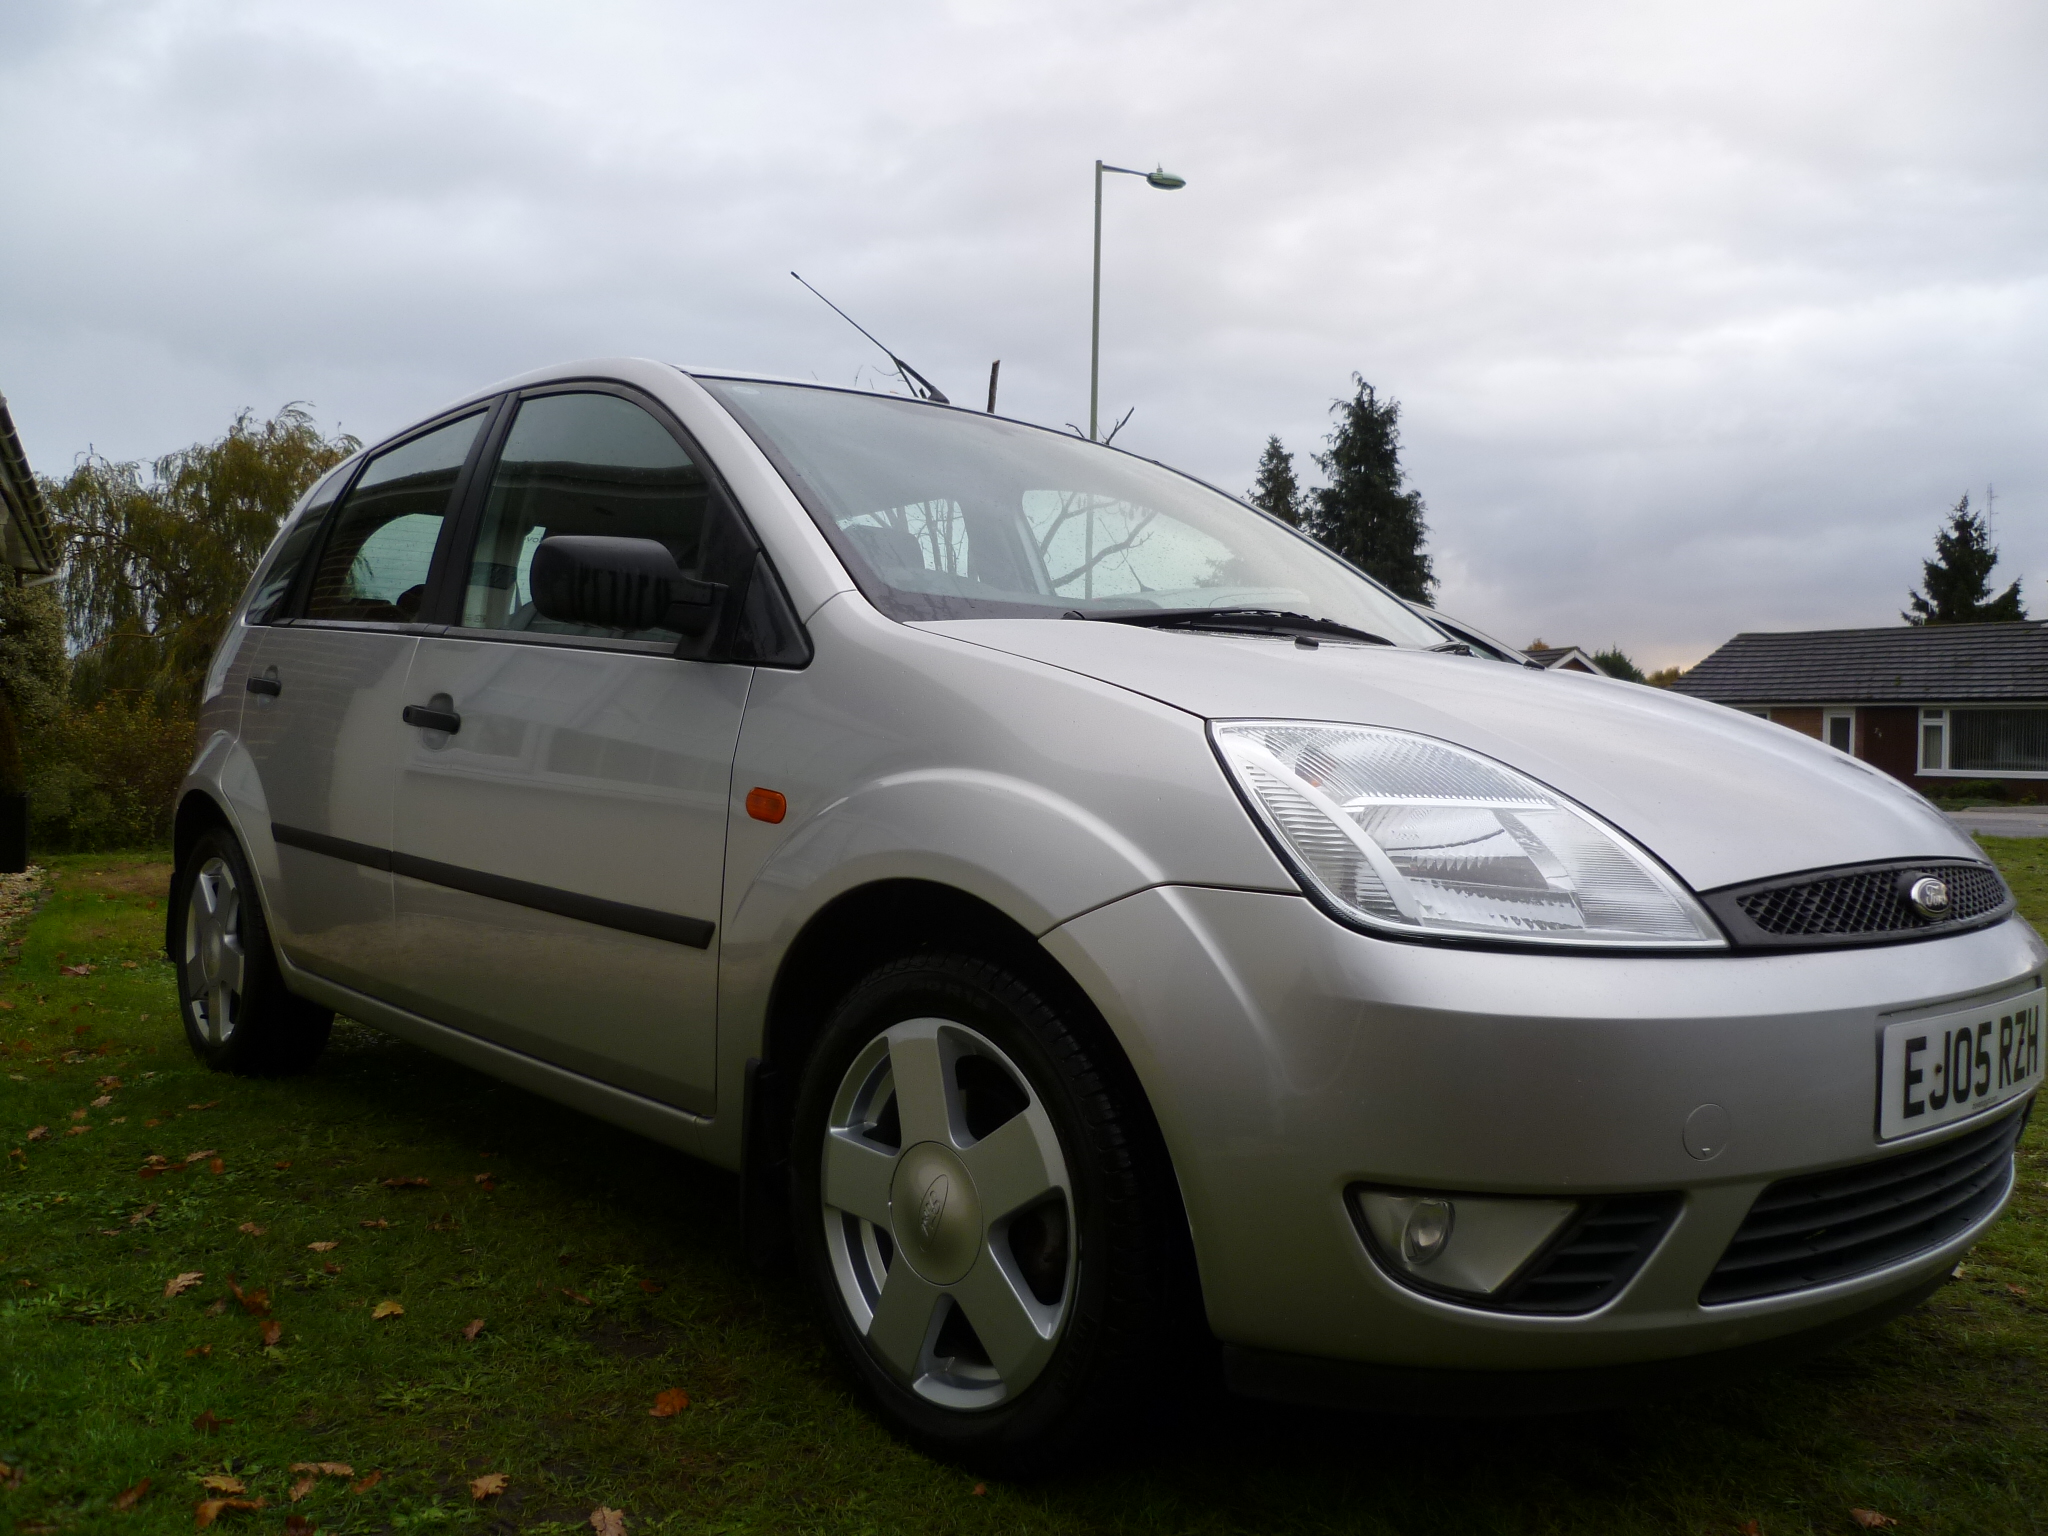 2005 Ford fiesta wp zetec review #8